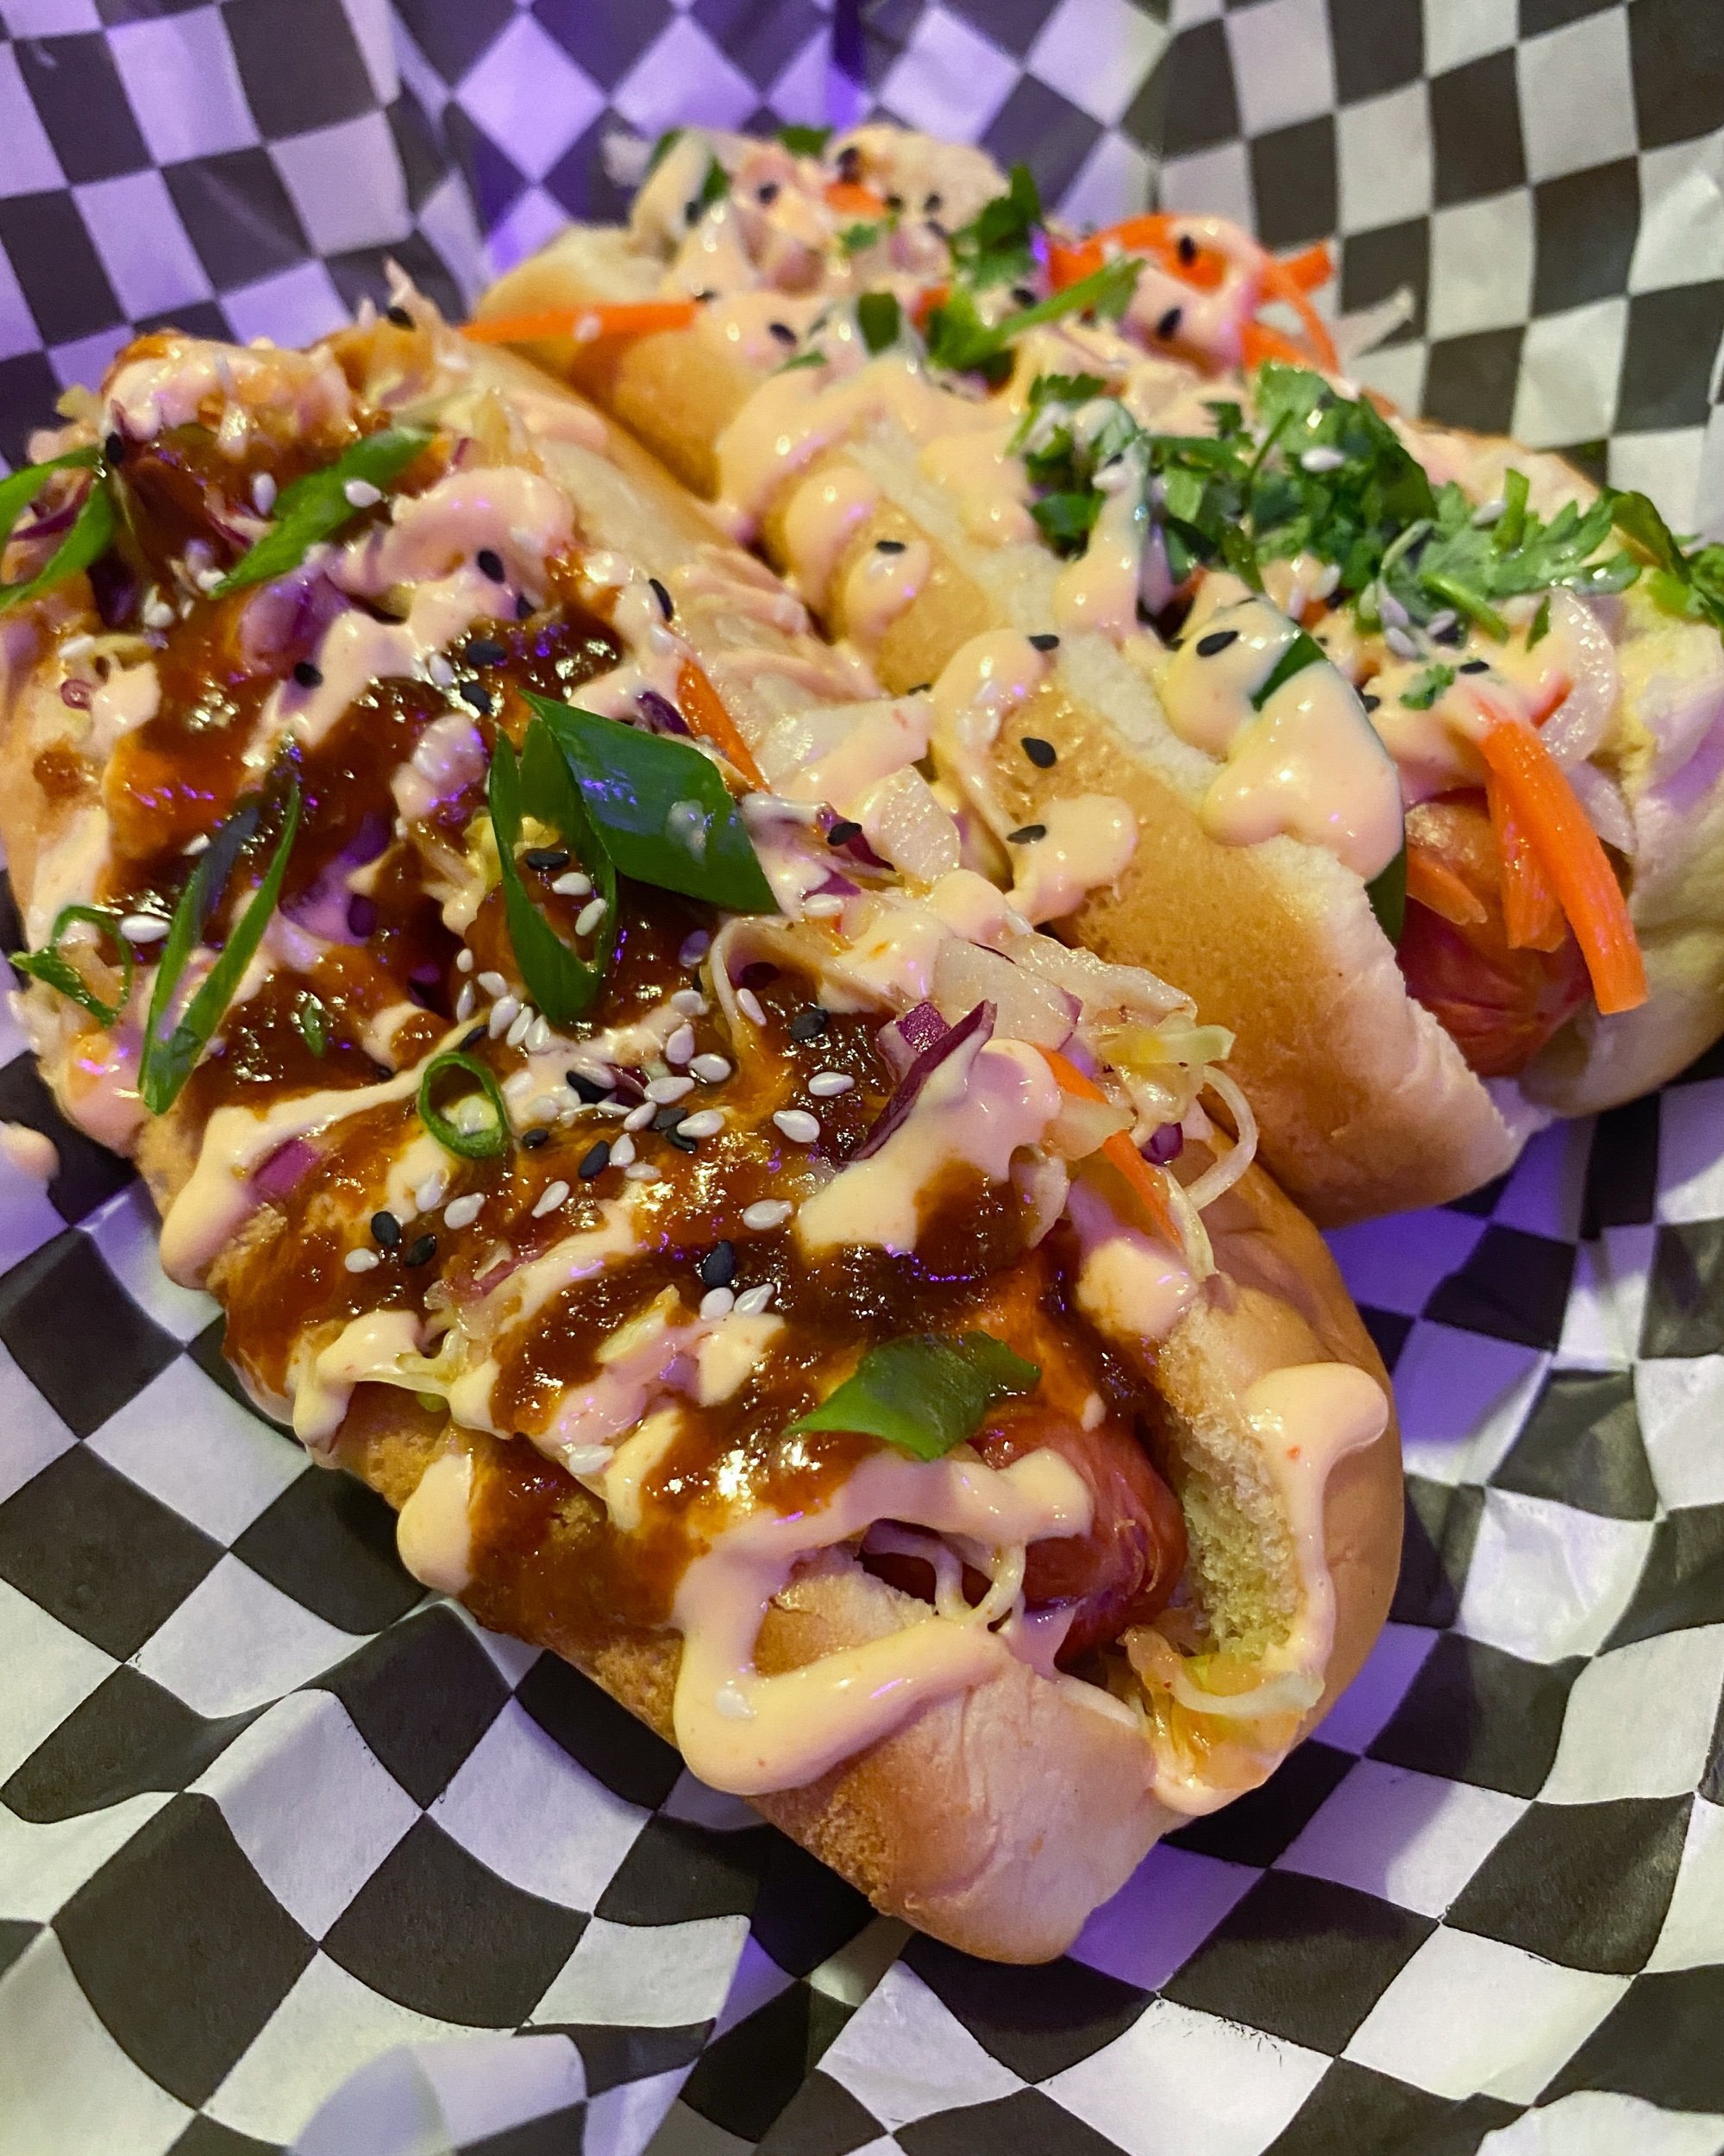 The Wurst Stret Dogs - Seoul Train &amp; Bahn-Mi and Clyde: